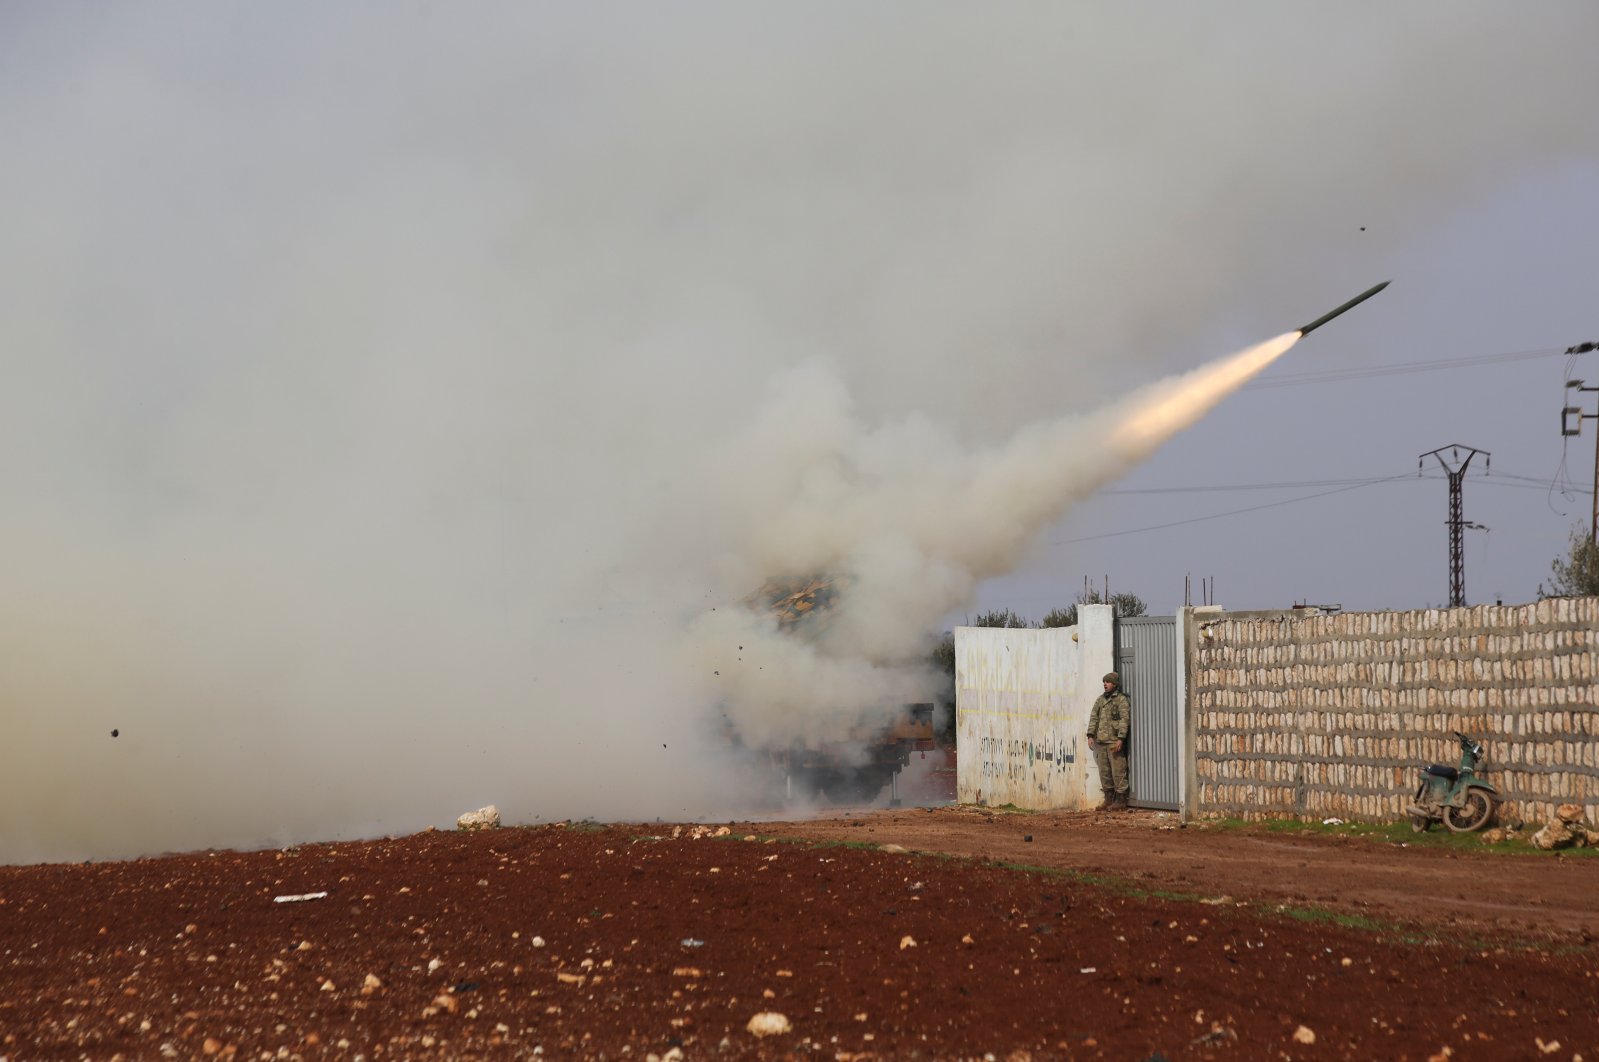 Turkish soldiers fire a missile at Assad regime position in the province of Idlib, Syria, Friday, Feb. 14, 2020. (AP Photo)